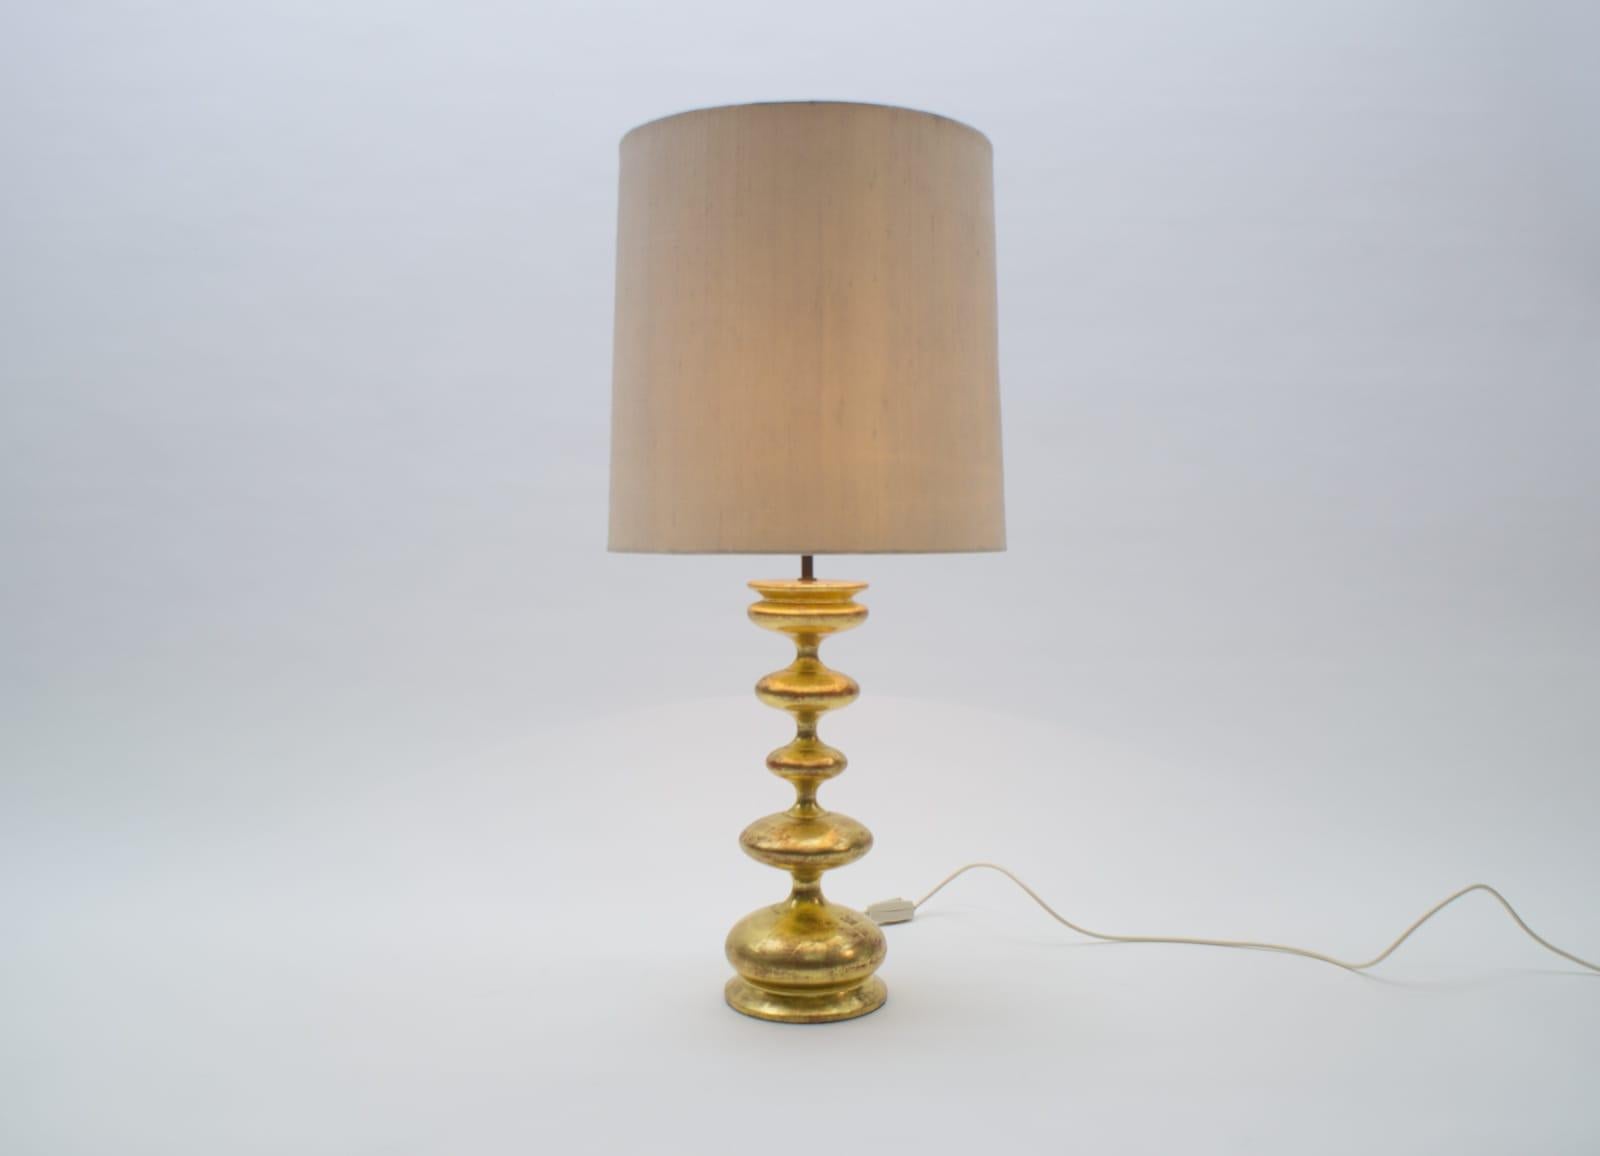 Gold-plated Italian table lamp in Hollywood Regency style. 

This table lamp requires E27 bulb. The height of the base without the shade is 50cm.